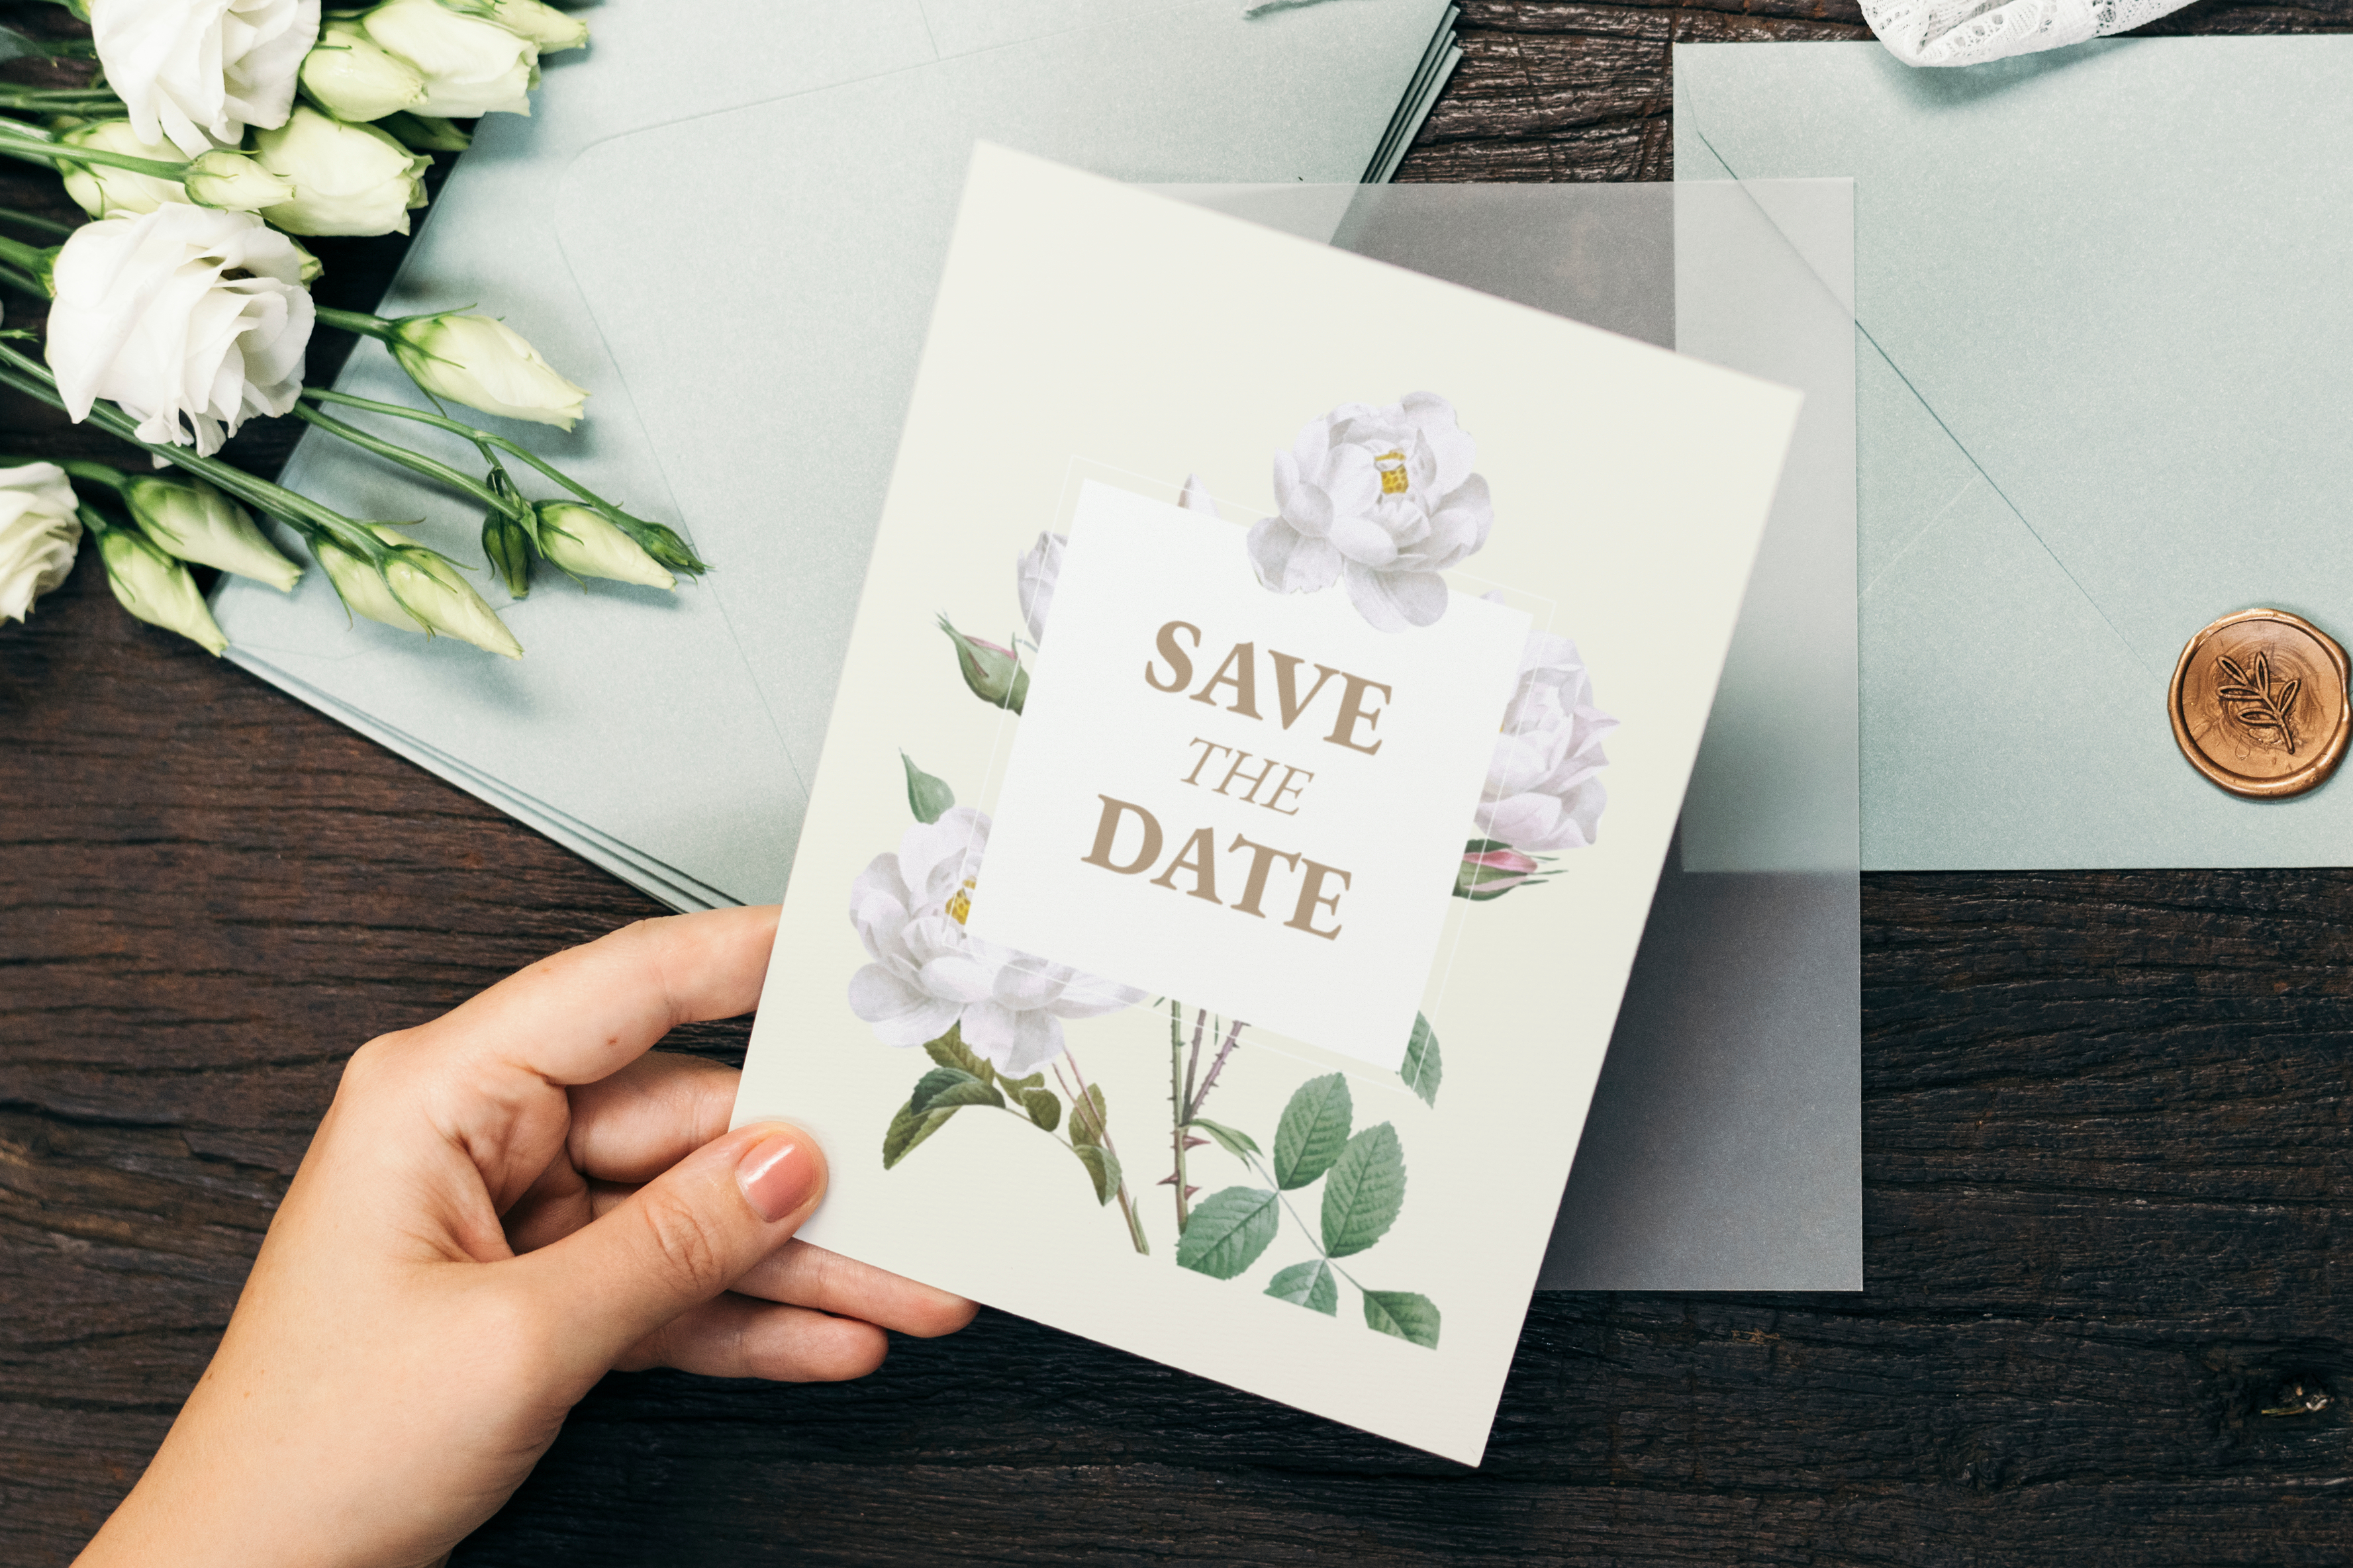 Save the date card | Source: Shutterstock